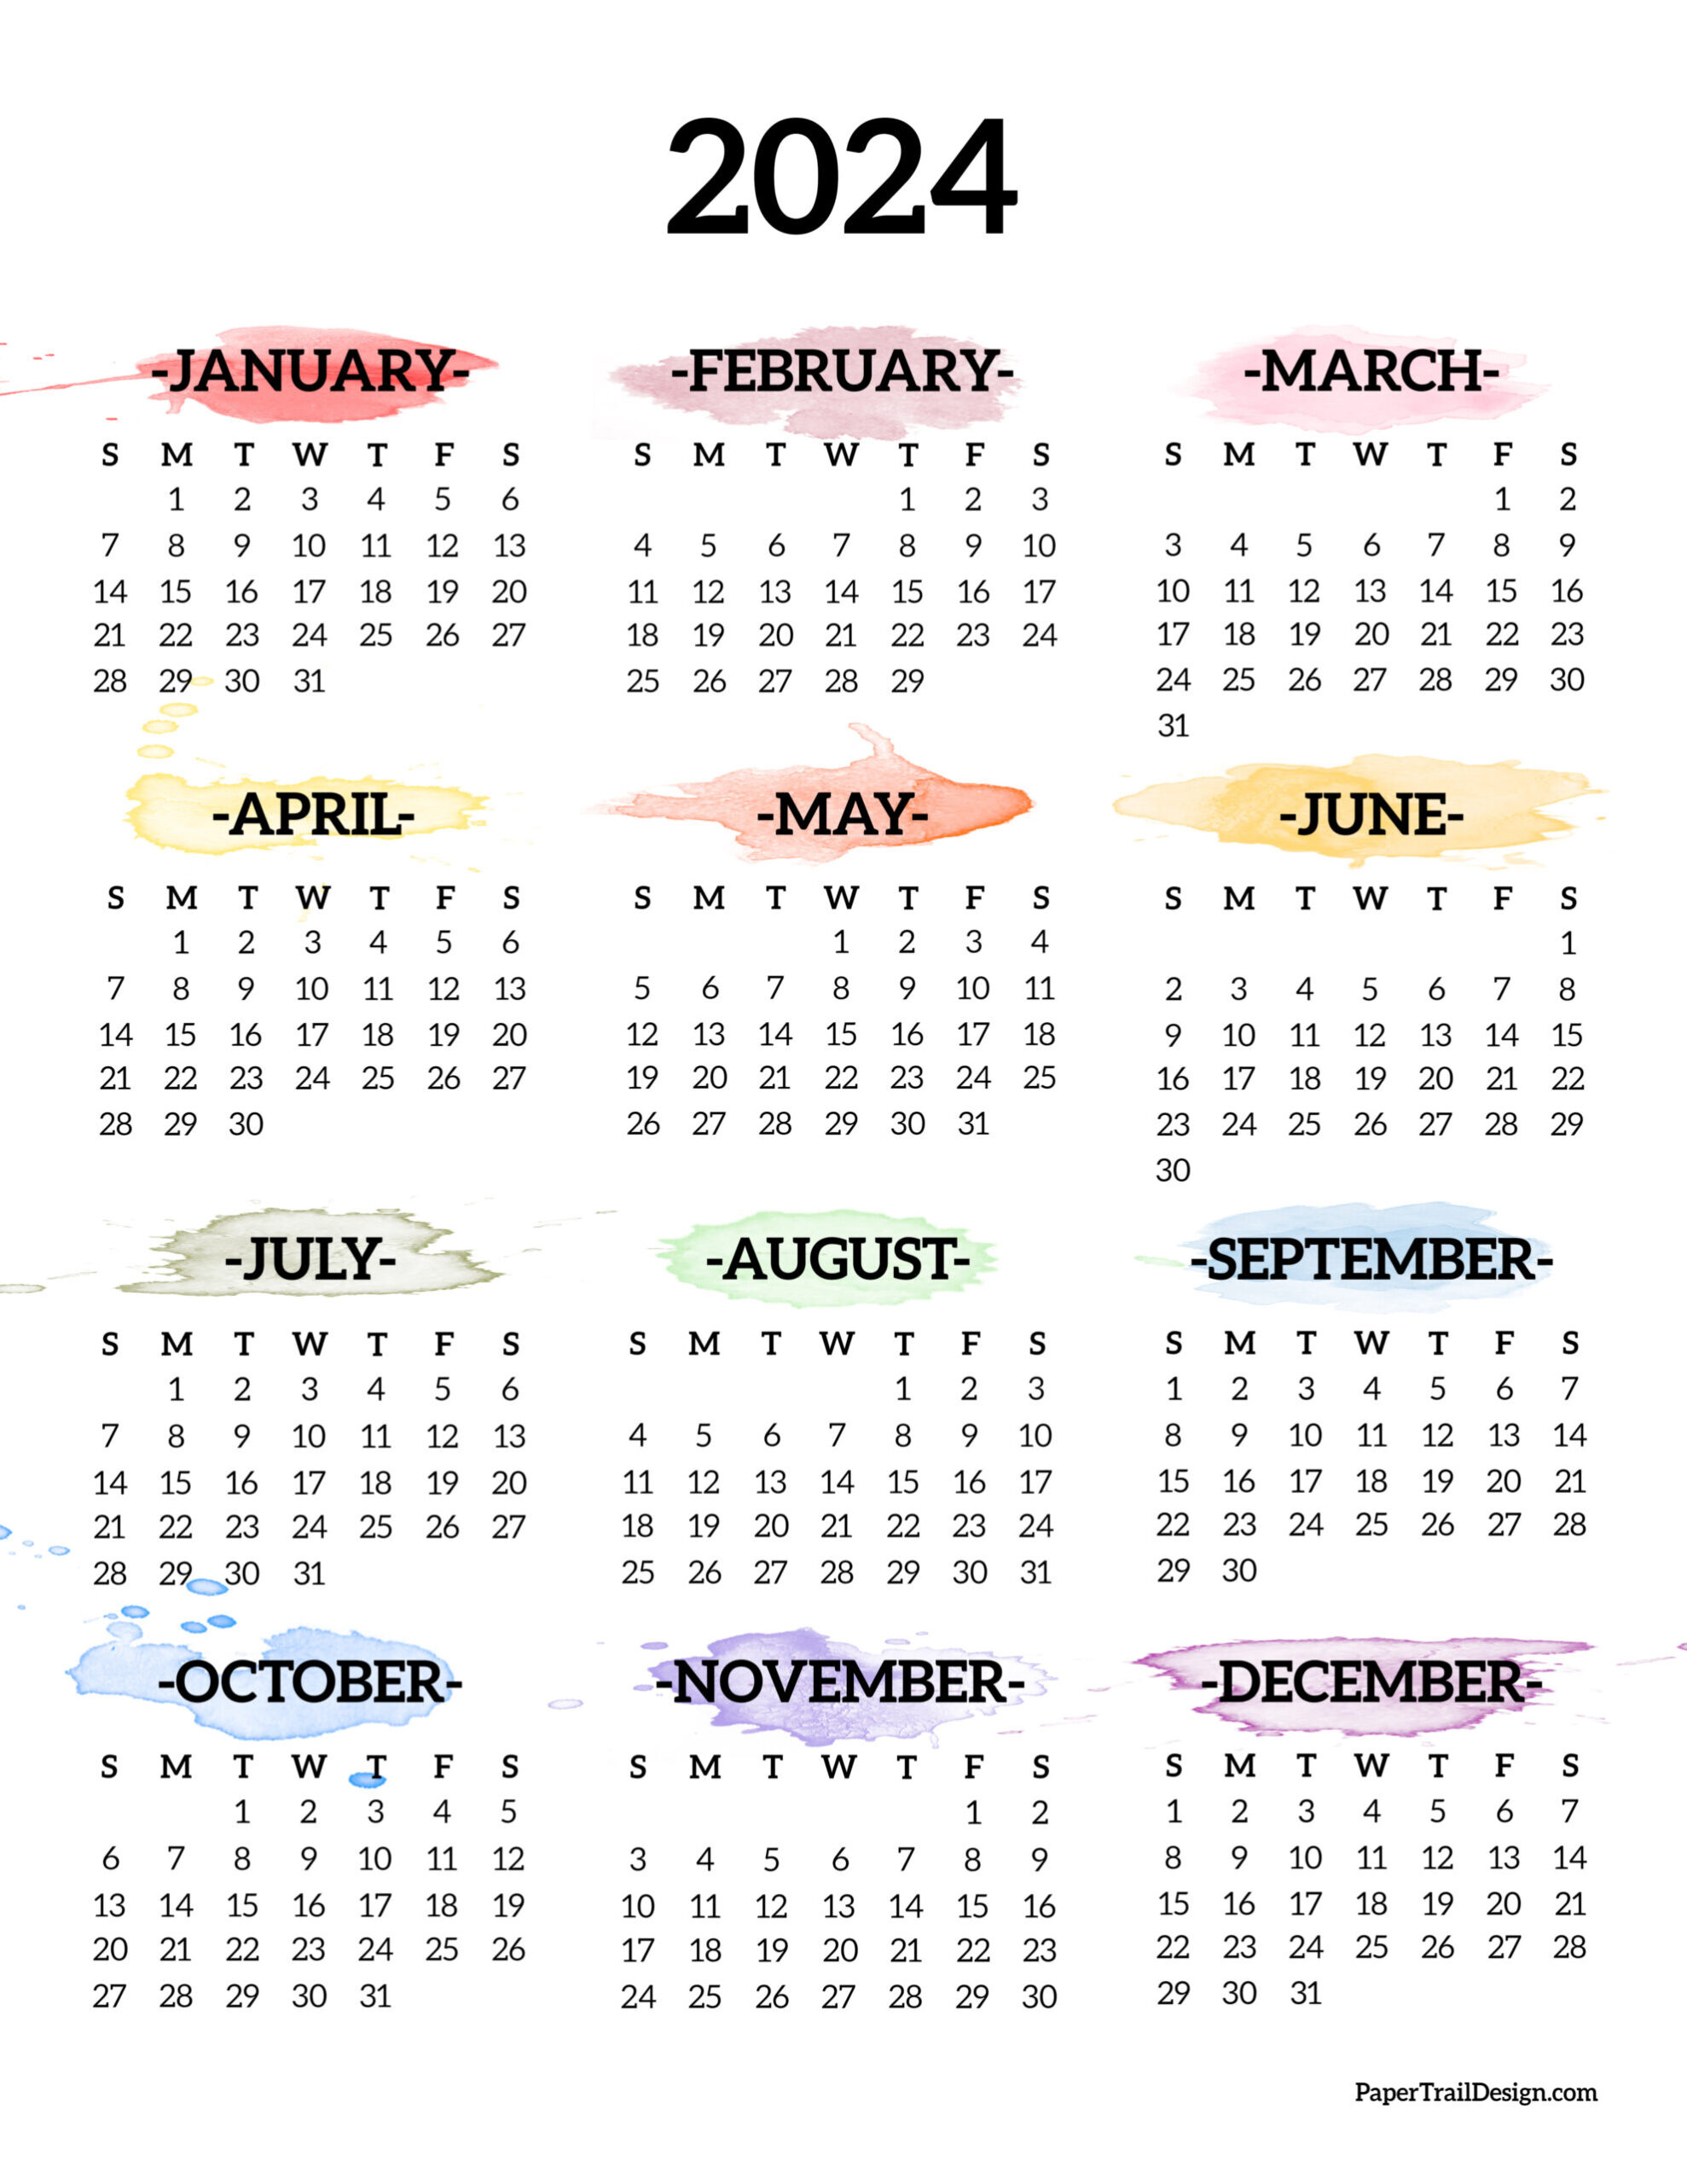 Calendar 2024 Printable One Page - Paper Trail Design for Printable One Page Calendar 2024